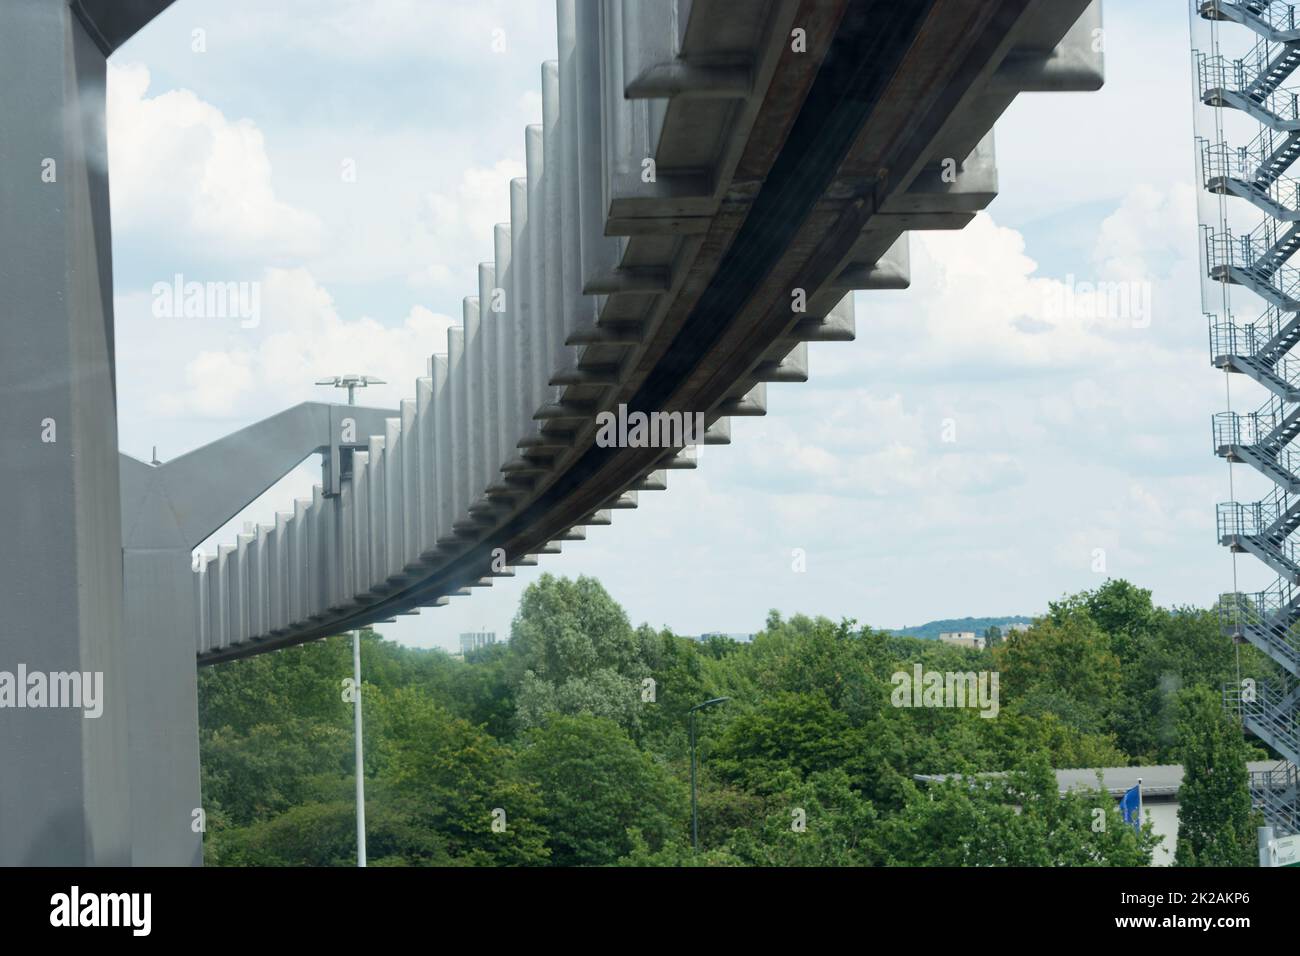 Sky-Train Funicular in airport. Copy space for text. Stock Photo